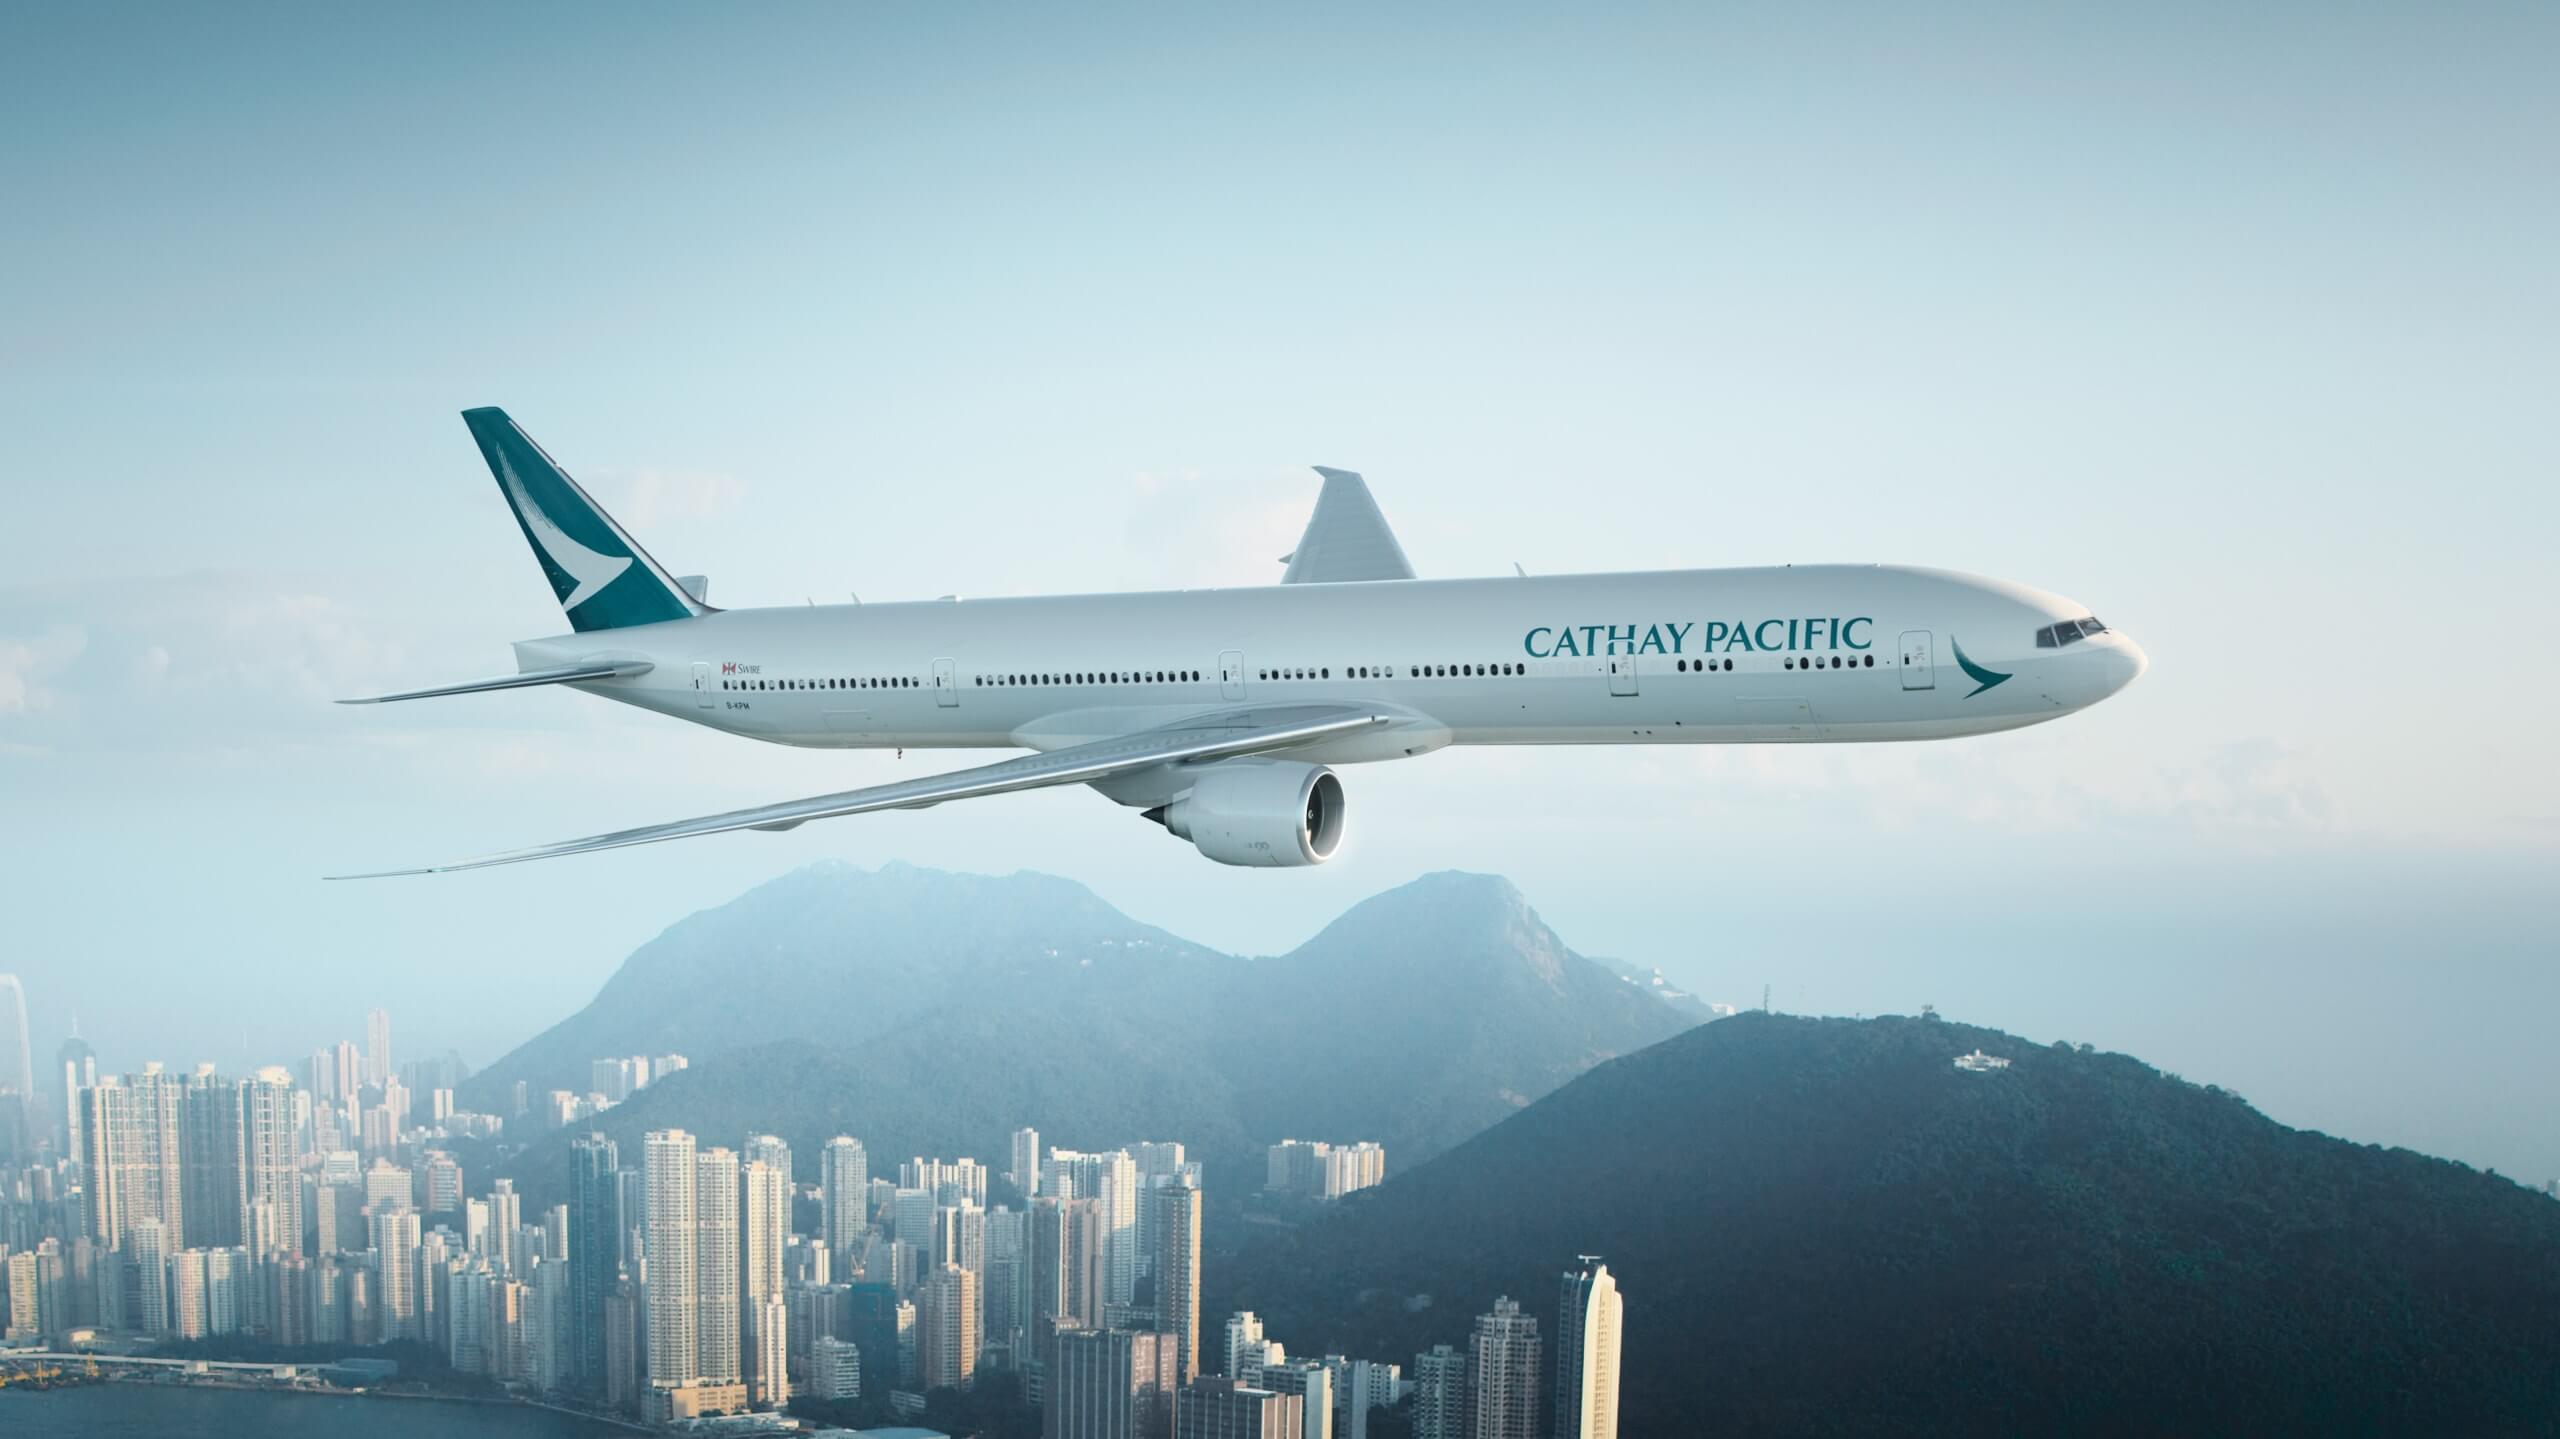 Cathay Pacific waited seven months to announce a data breach today